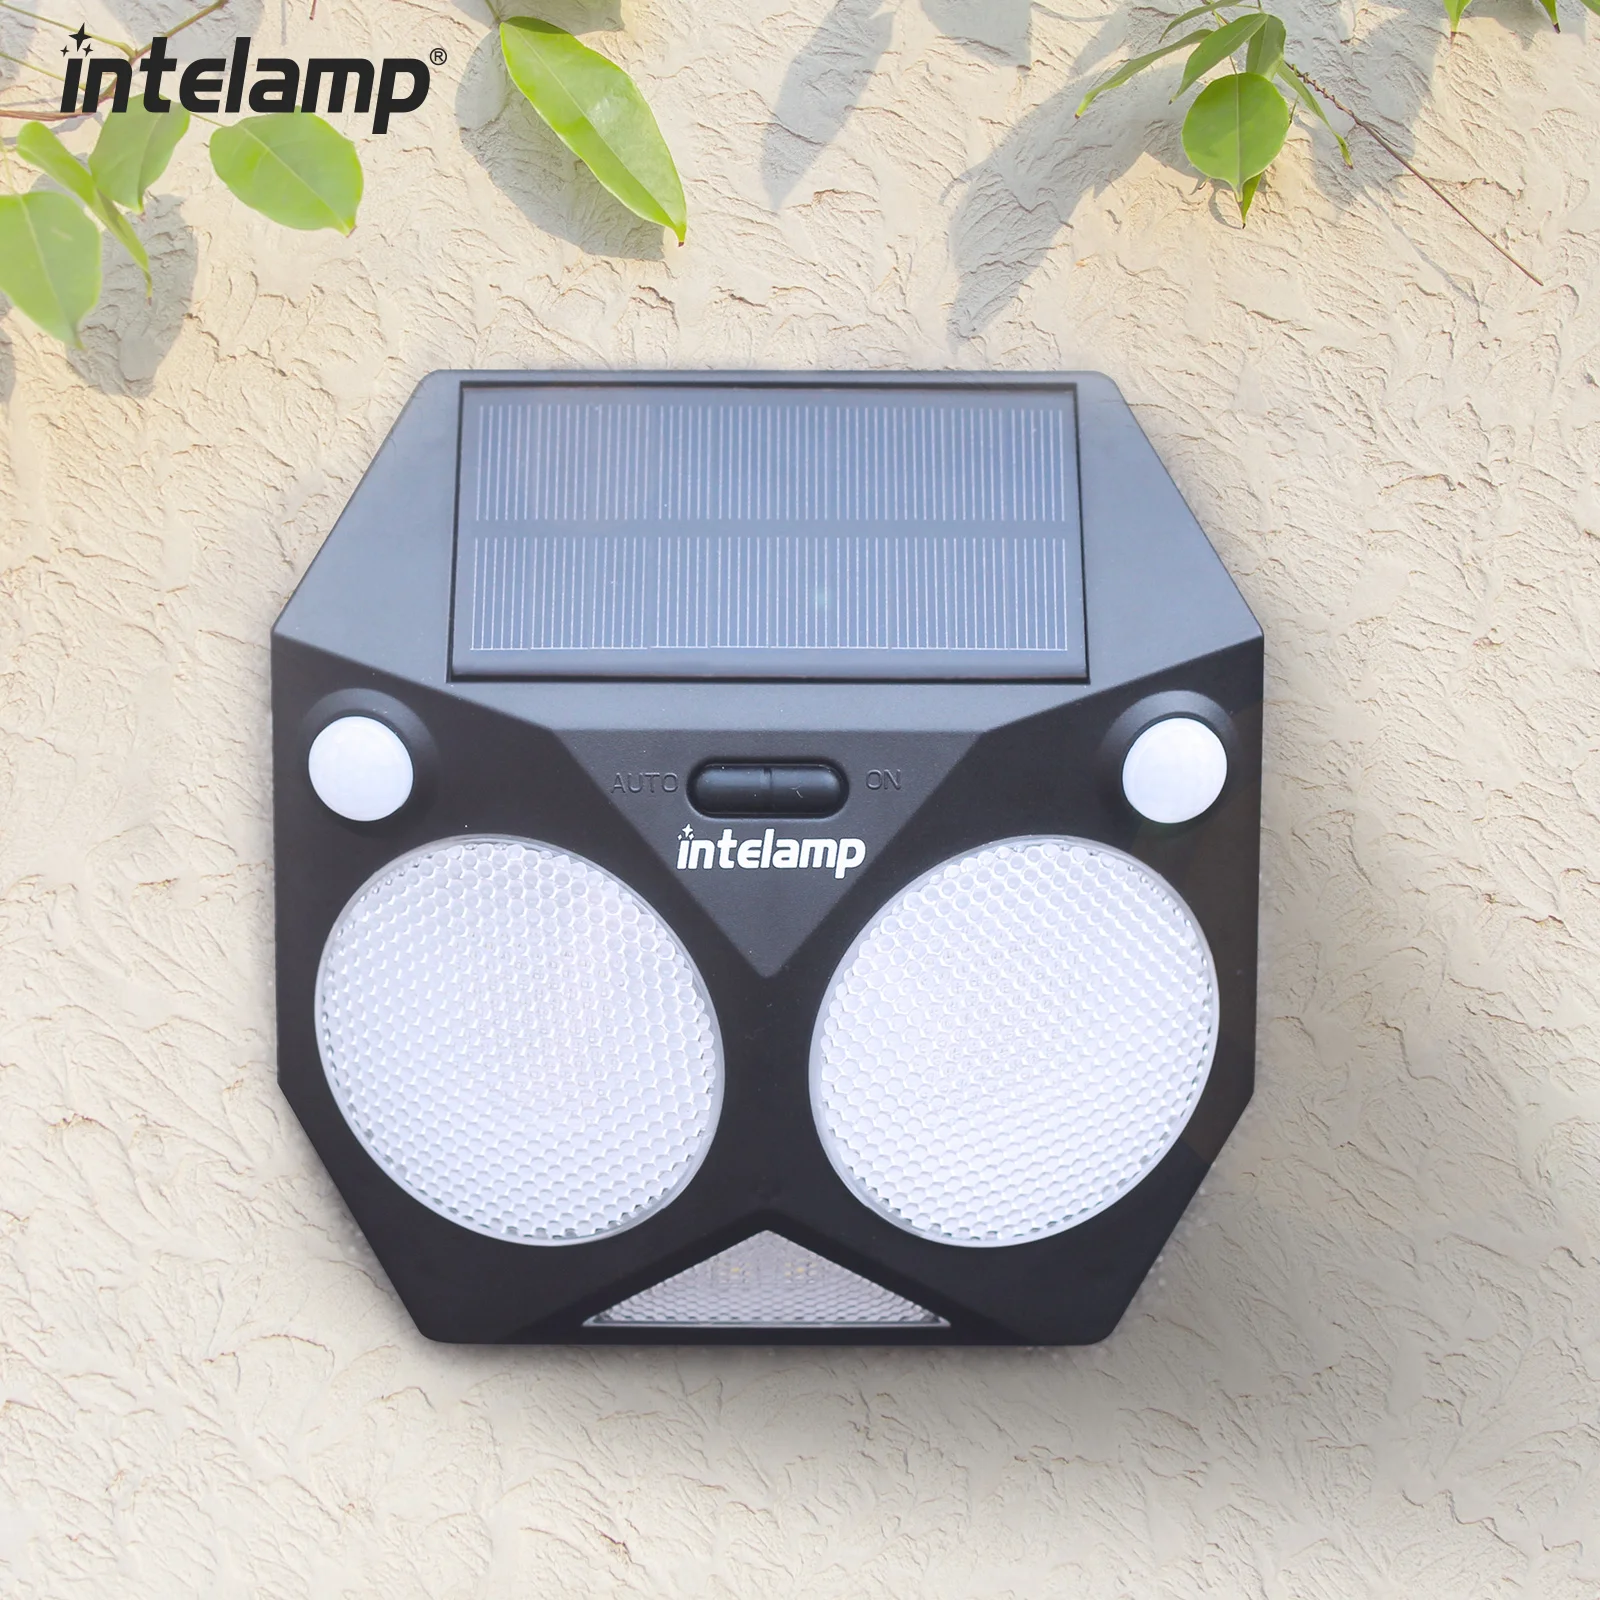 Robot Shape Solar Lights Outdoor with Motion Sensor IP65 Waterproof Super Bright Wall Lamp for Garden Yard Garage Stairs Porch garage roof for robot lawn mower 77x103x46 cm